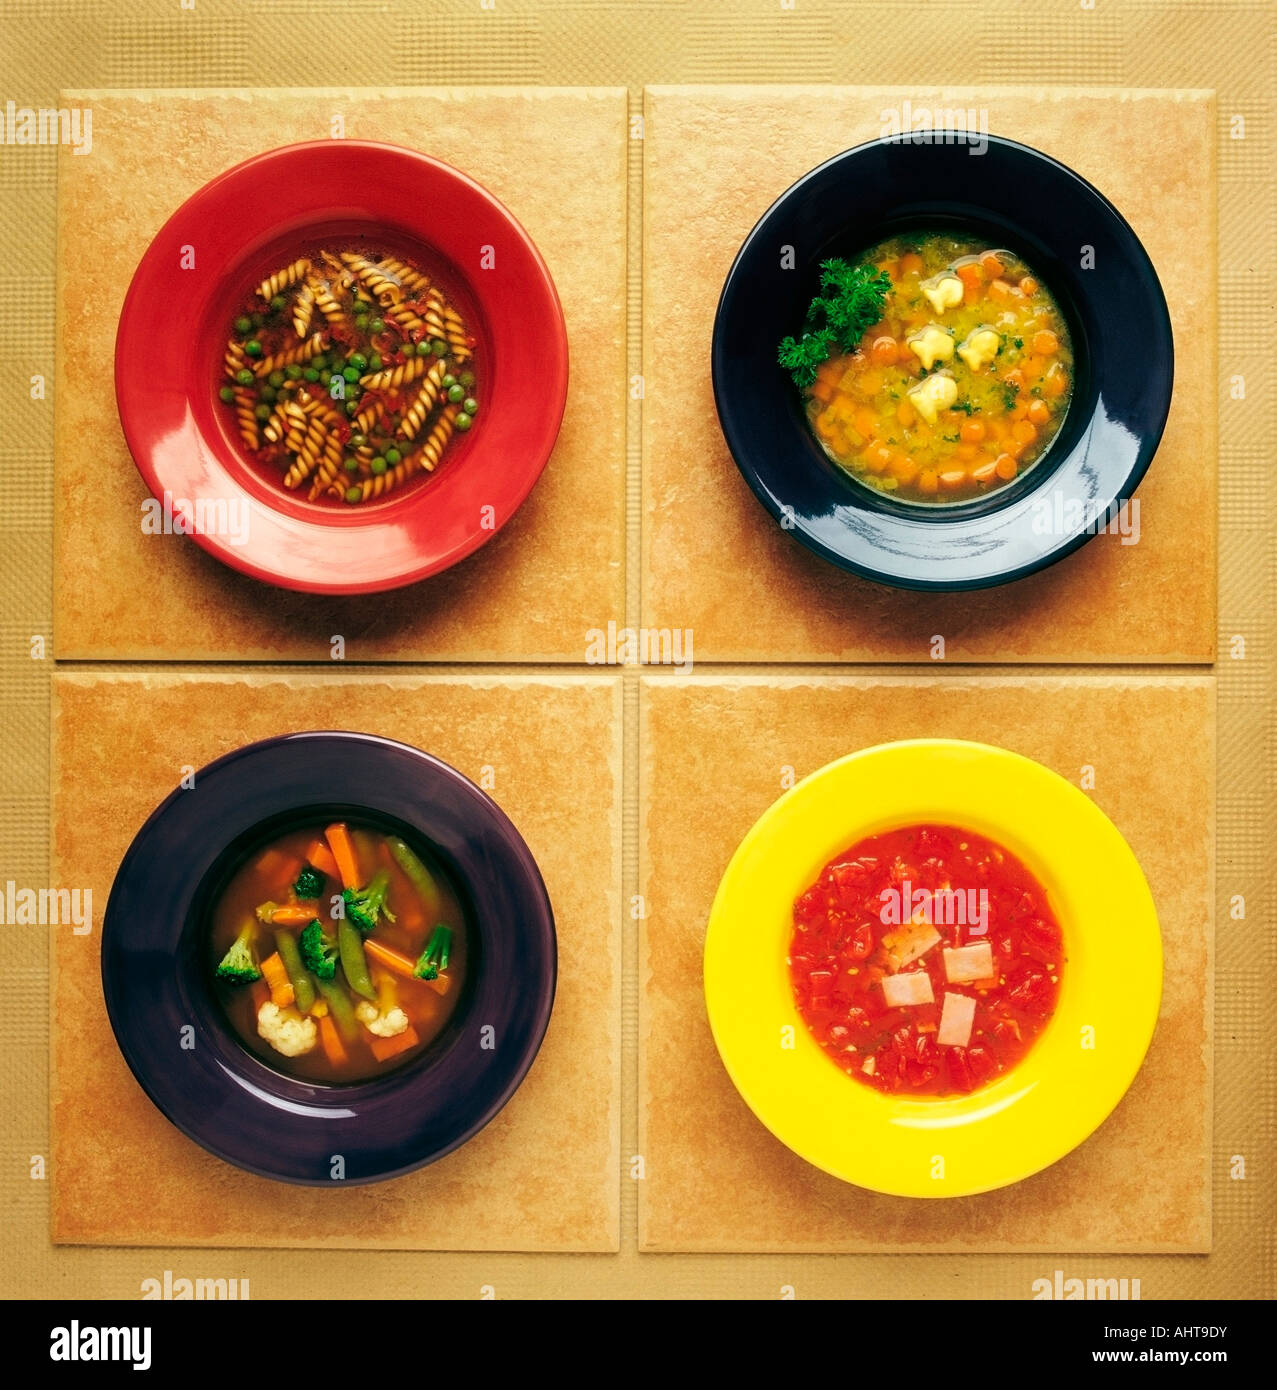 Four plates of different foods Stock Photo